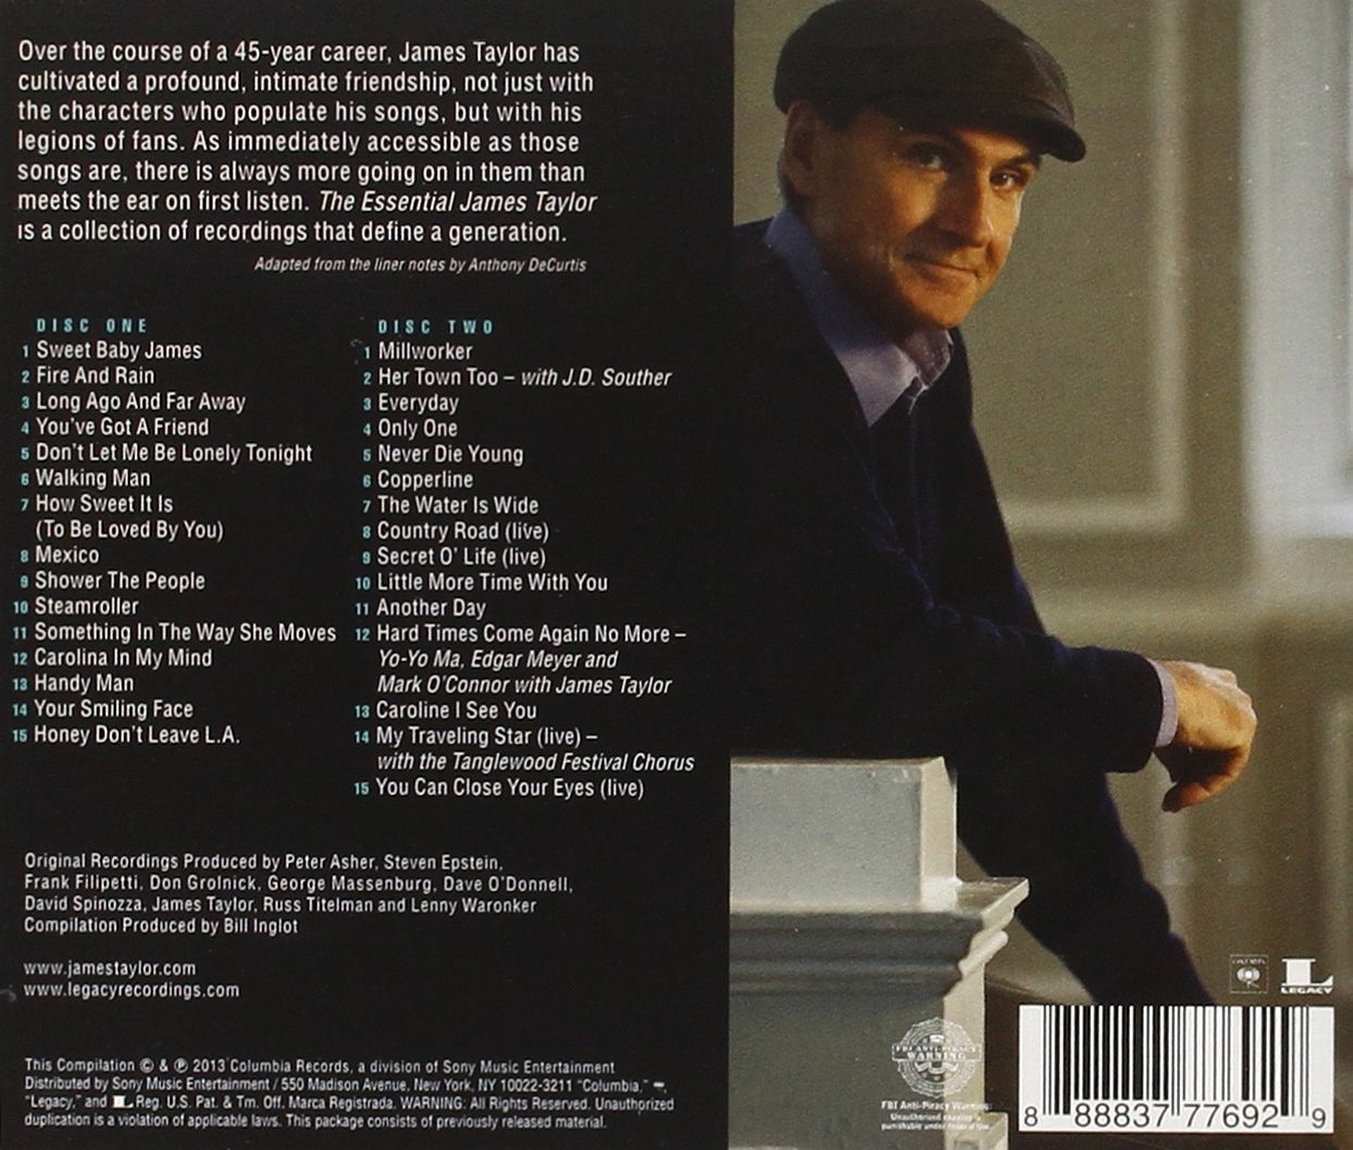 Release “The Essential James Taylor” by James Taylor